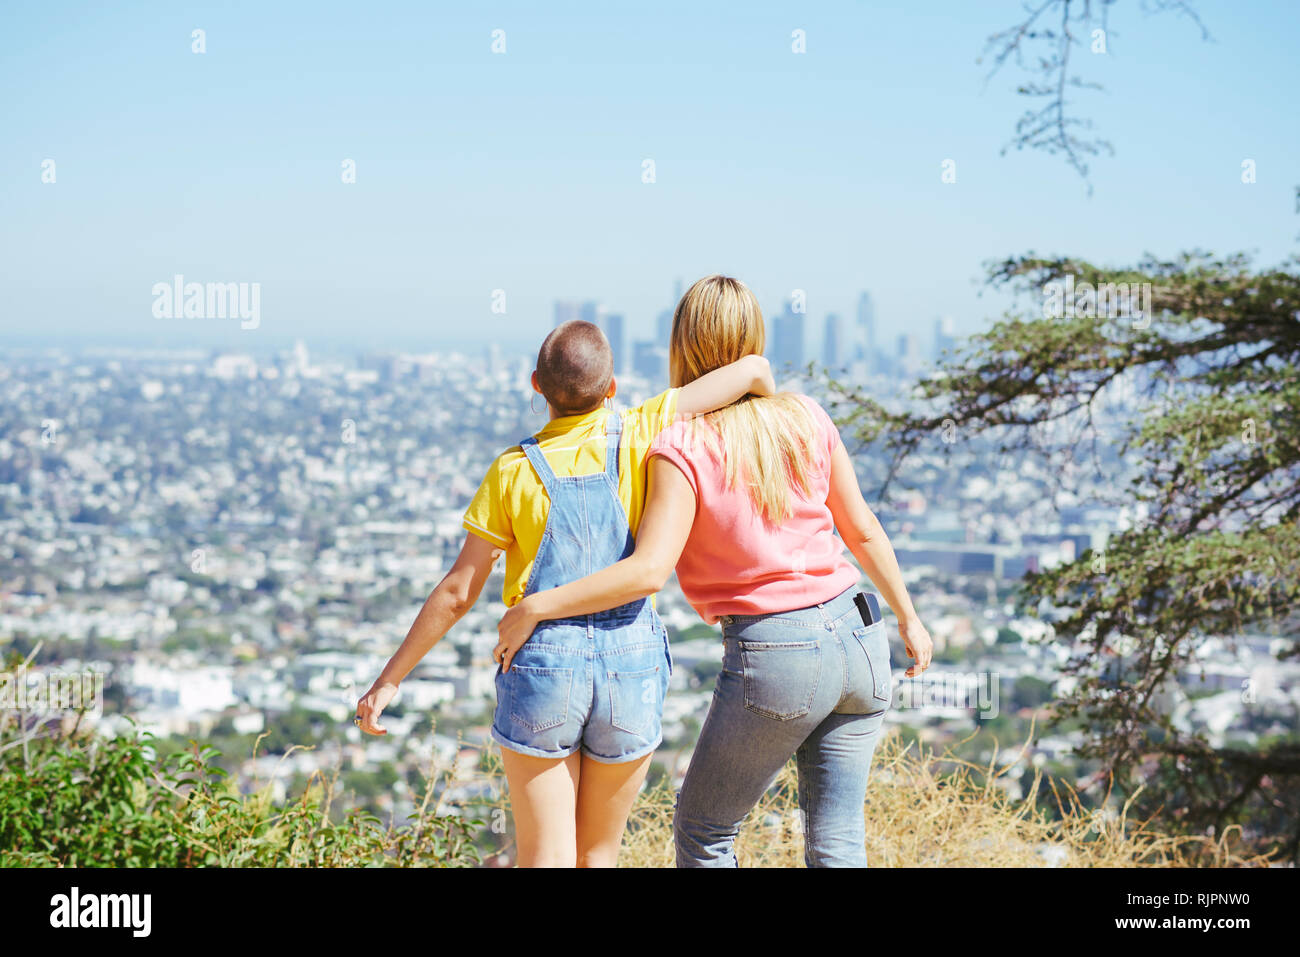 Two young female friends looking at skyline from hilltop, rear view, Los Angeles, California, USA Stock Photo